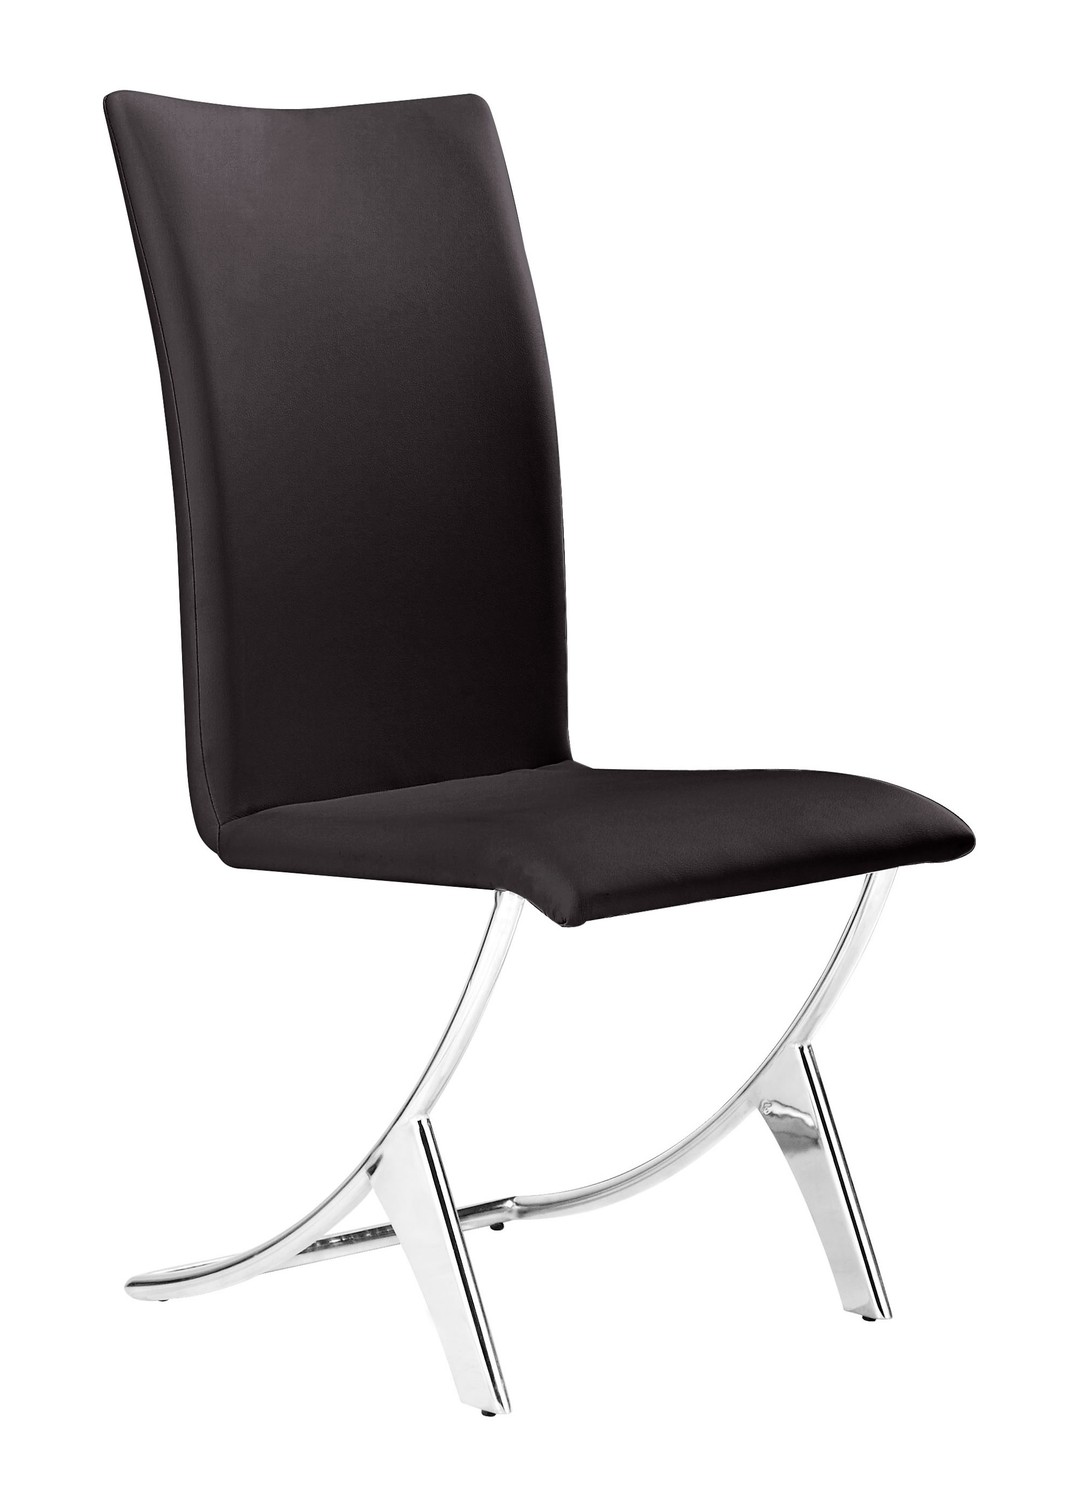 Warm Espresso Leatherette and Chrome Dining Chairs Set of 2